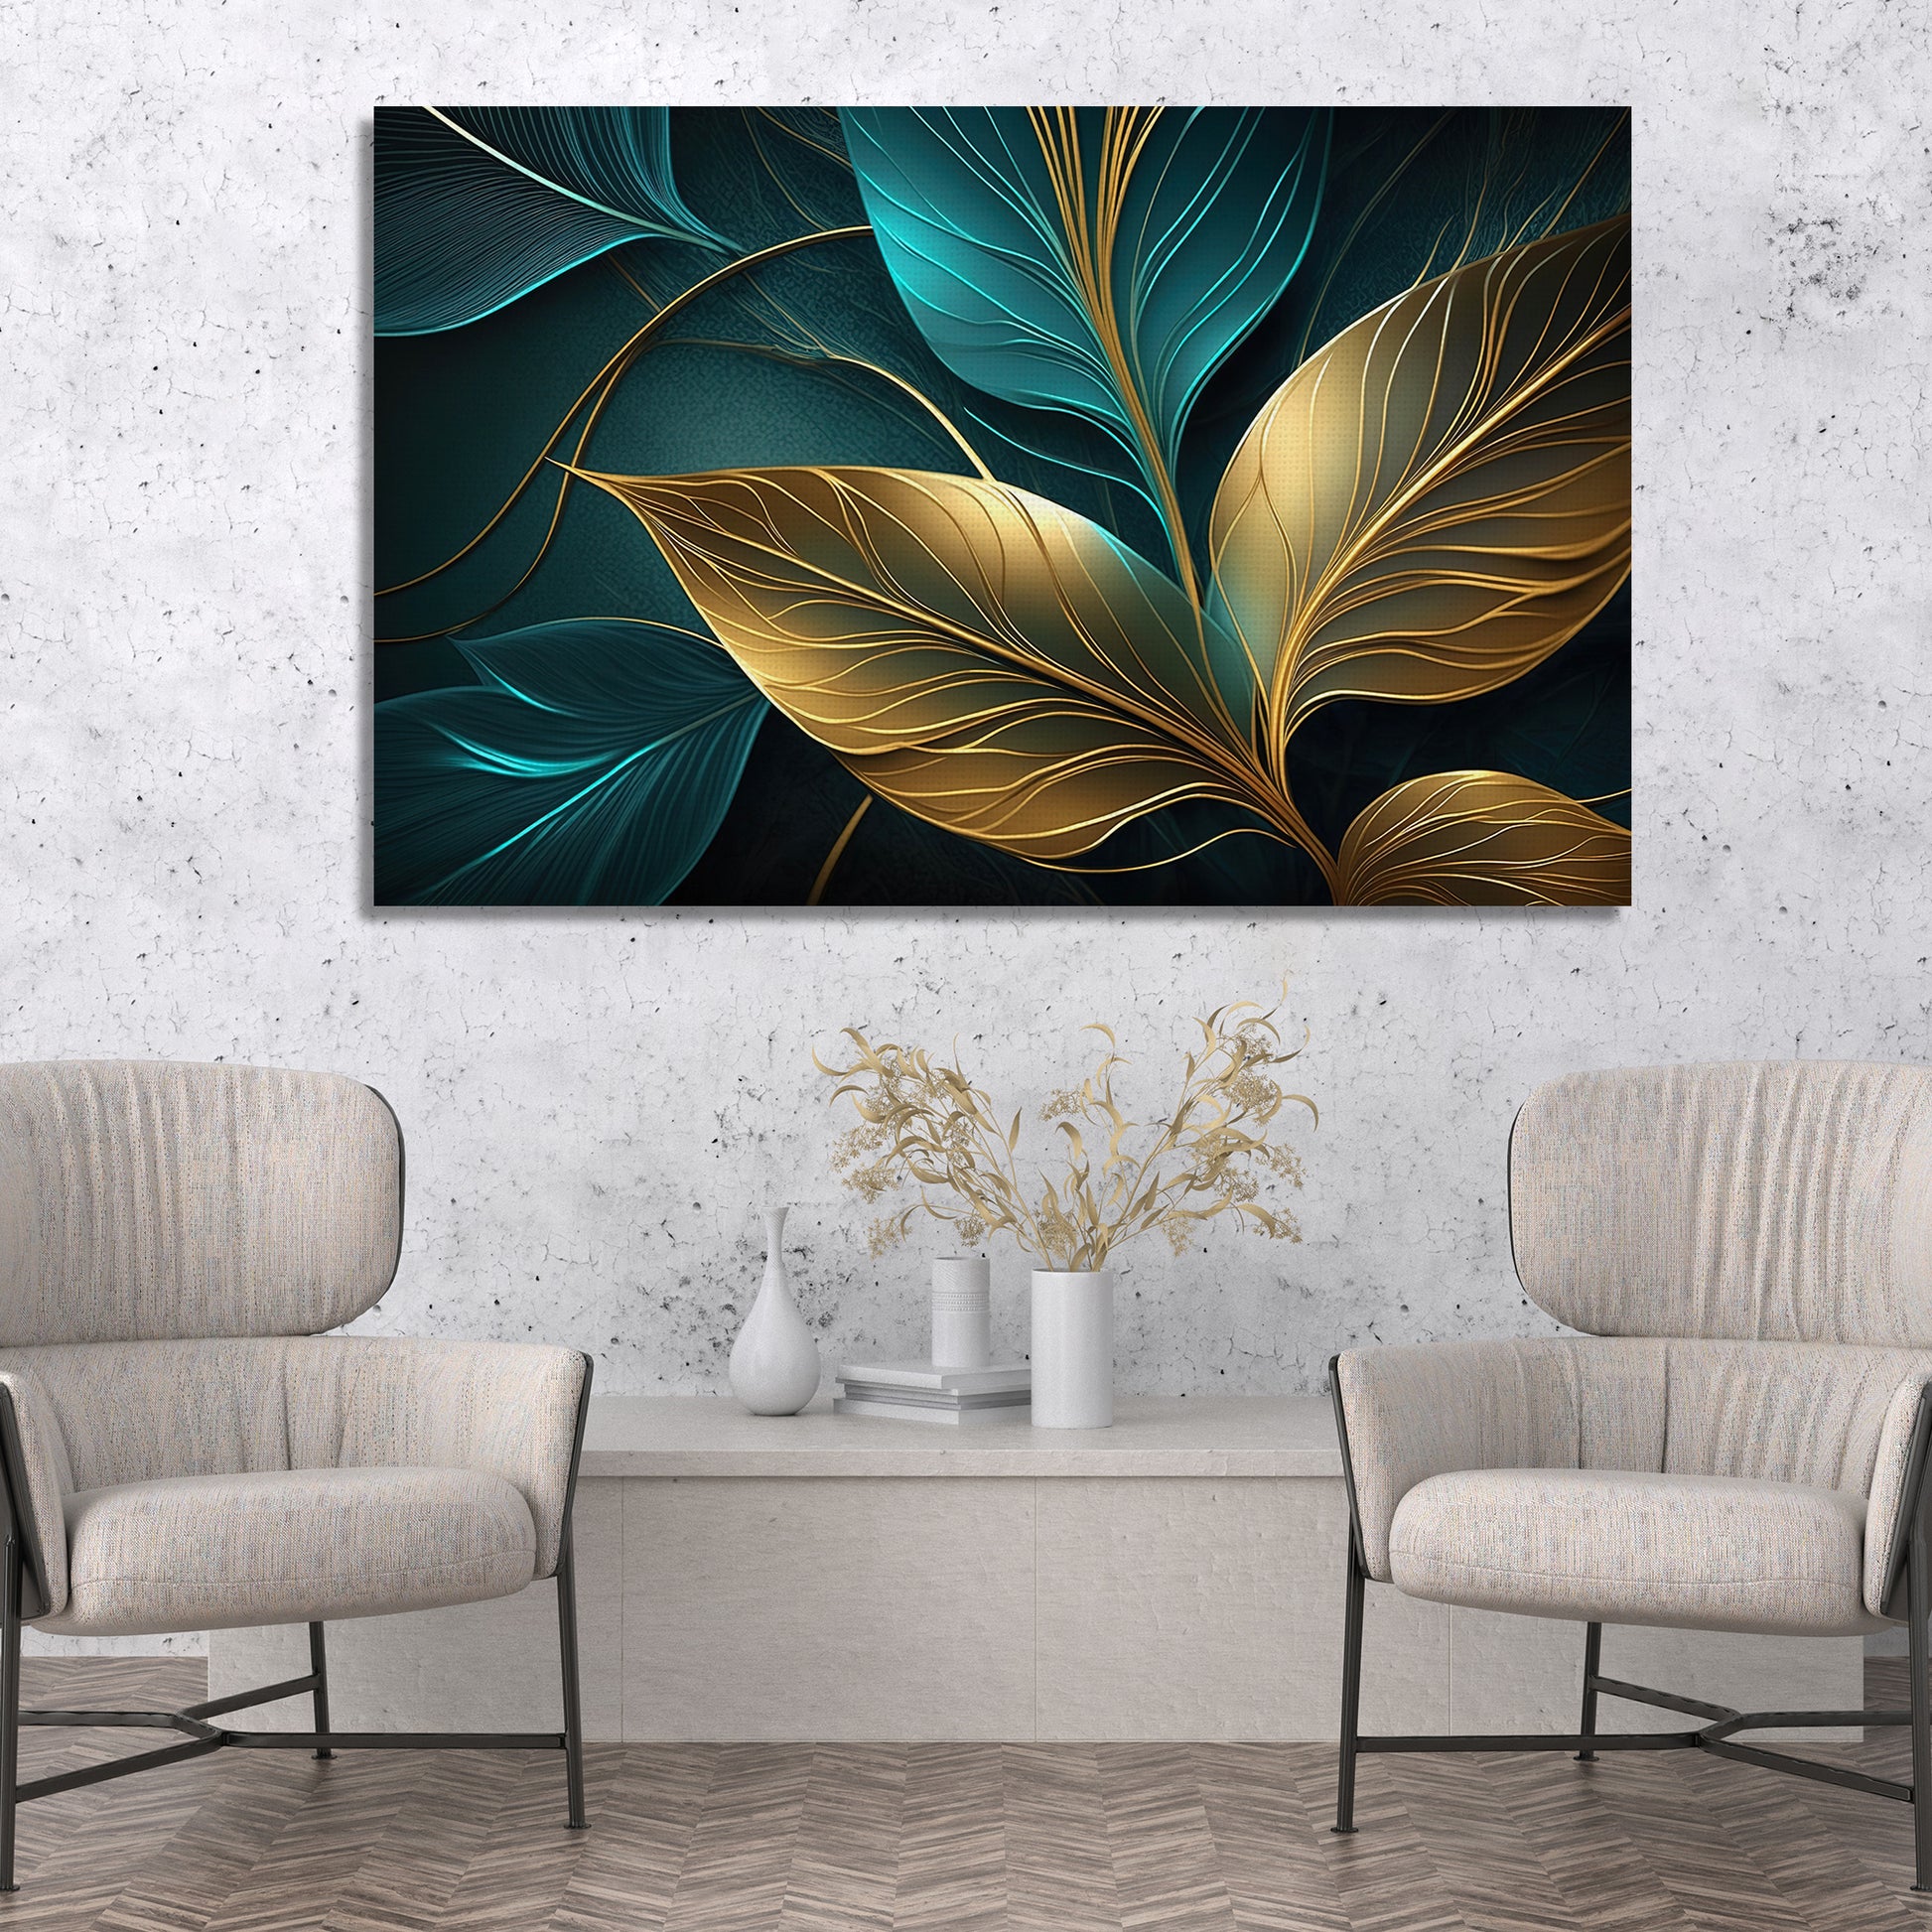 Flower Big Canvas Wall Art Painting For